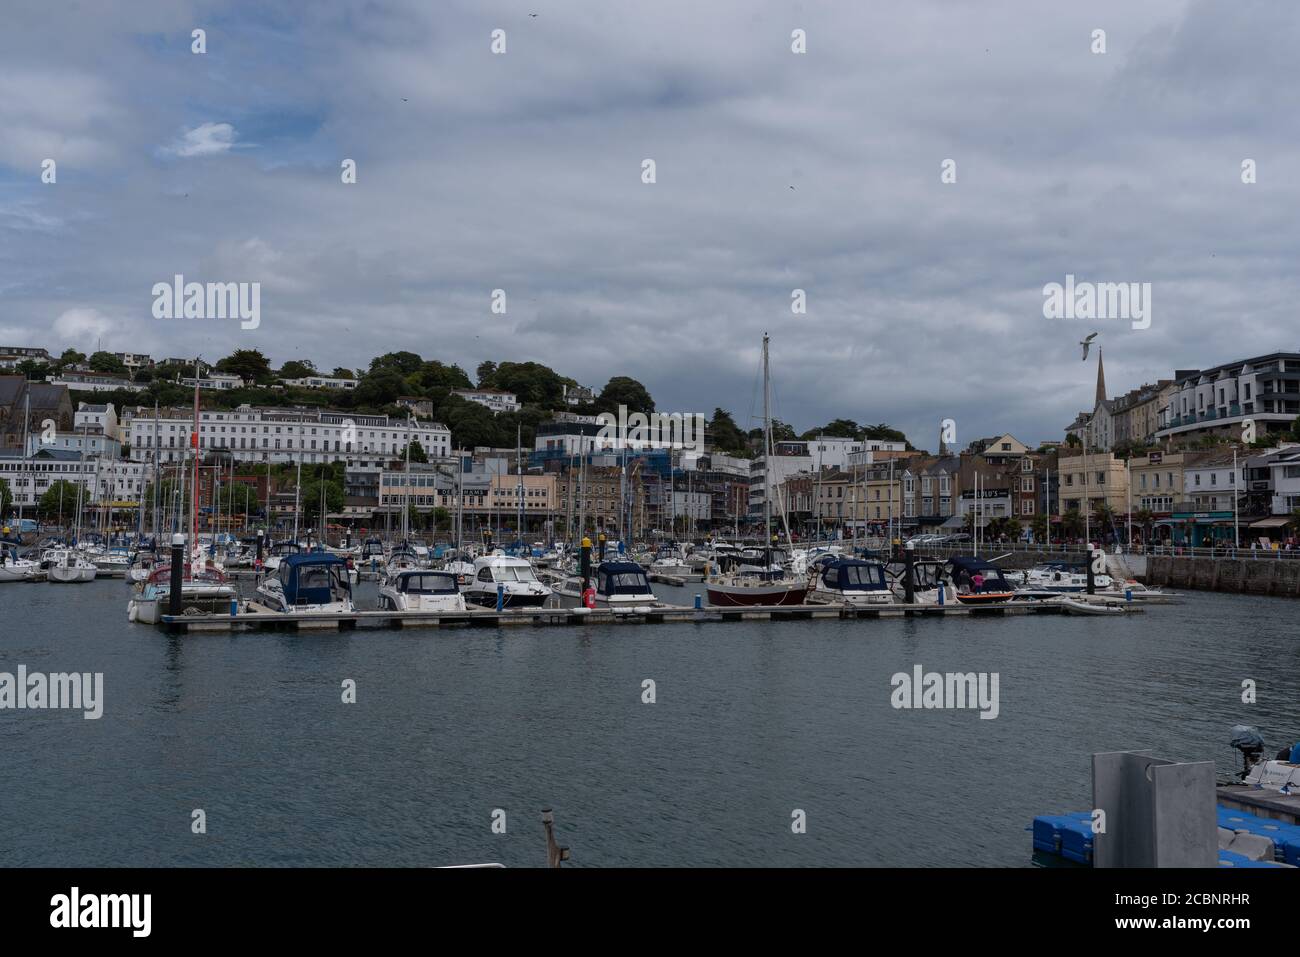 Torquay harbour on a bright cloudy day Stock Photo